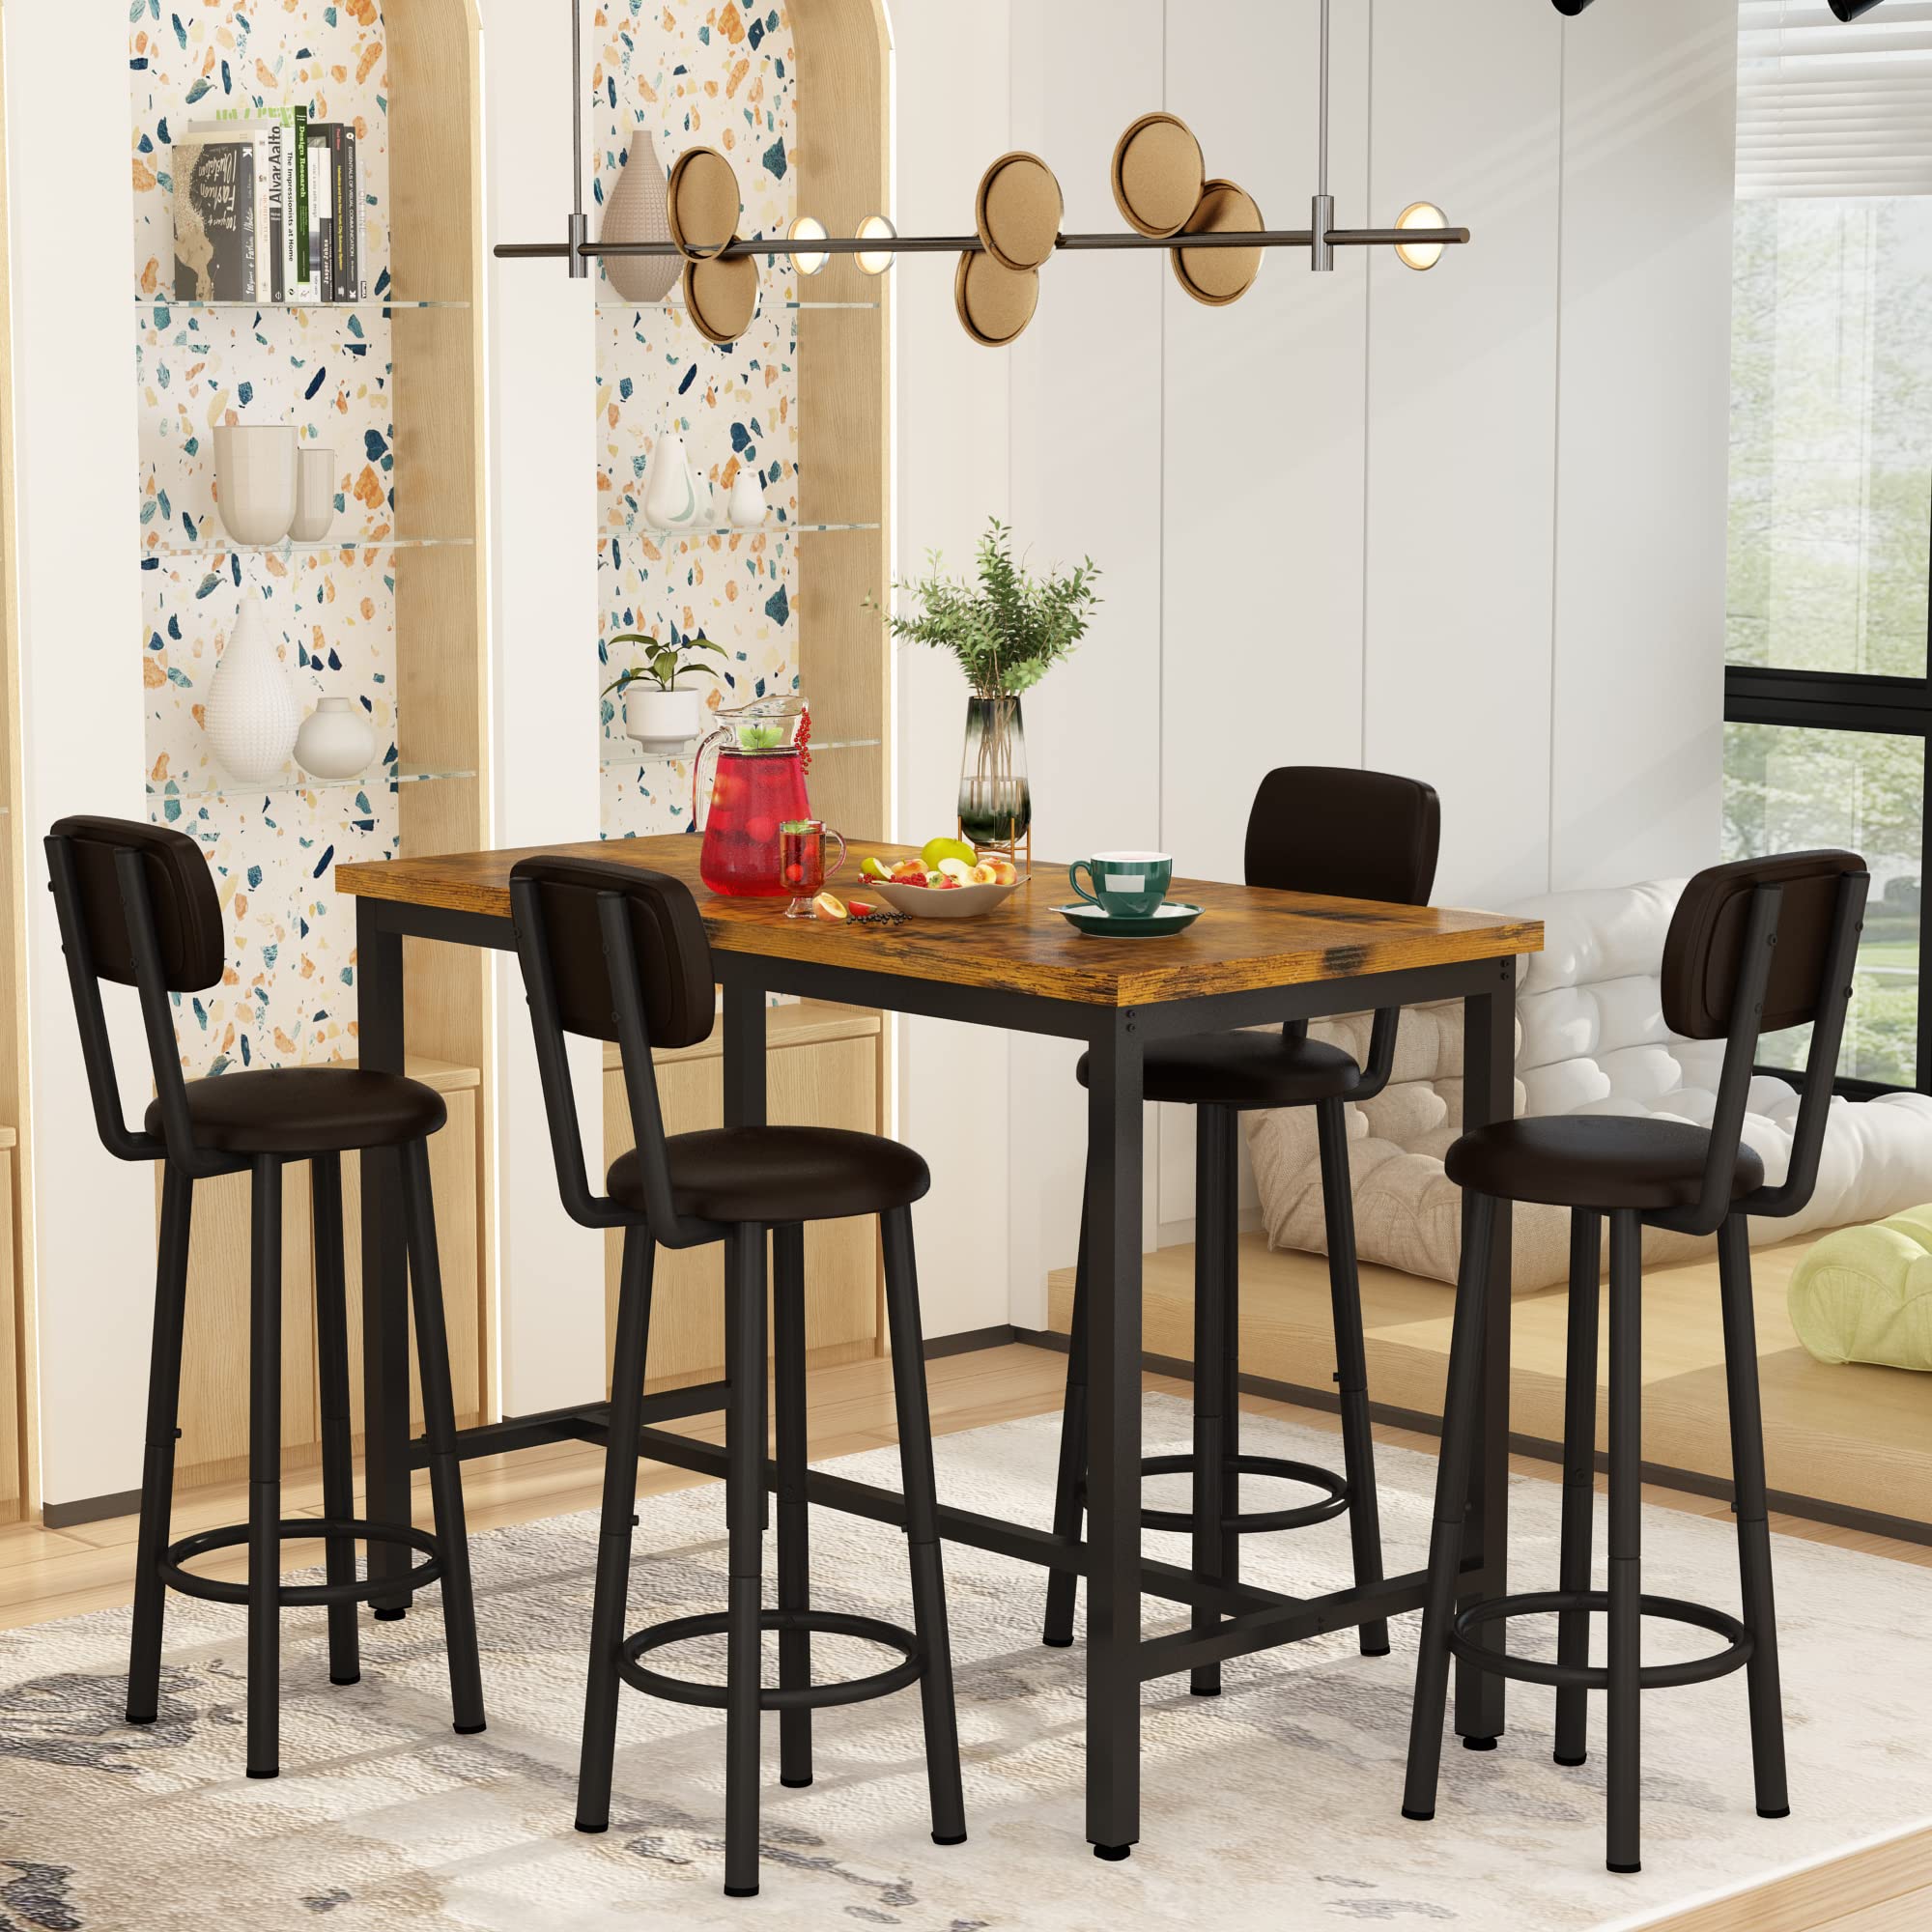 DKLGG Bar Stools, Set of 4 Bar Chairs, Tall Bar Stools with Backrest, PU Upholstered Breakfast Stools Armless Dining Chairs for Kitchen Island Pub Living Room